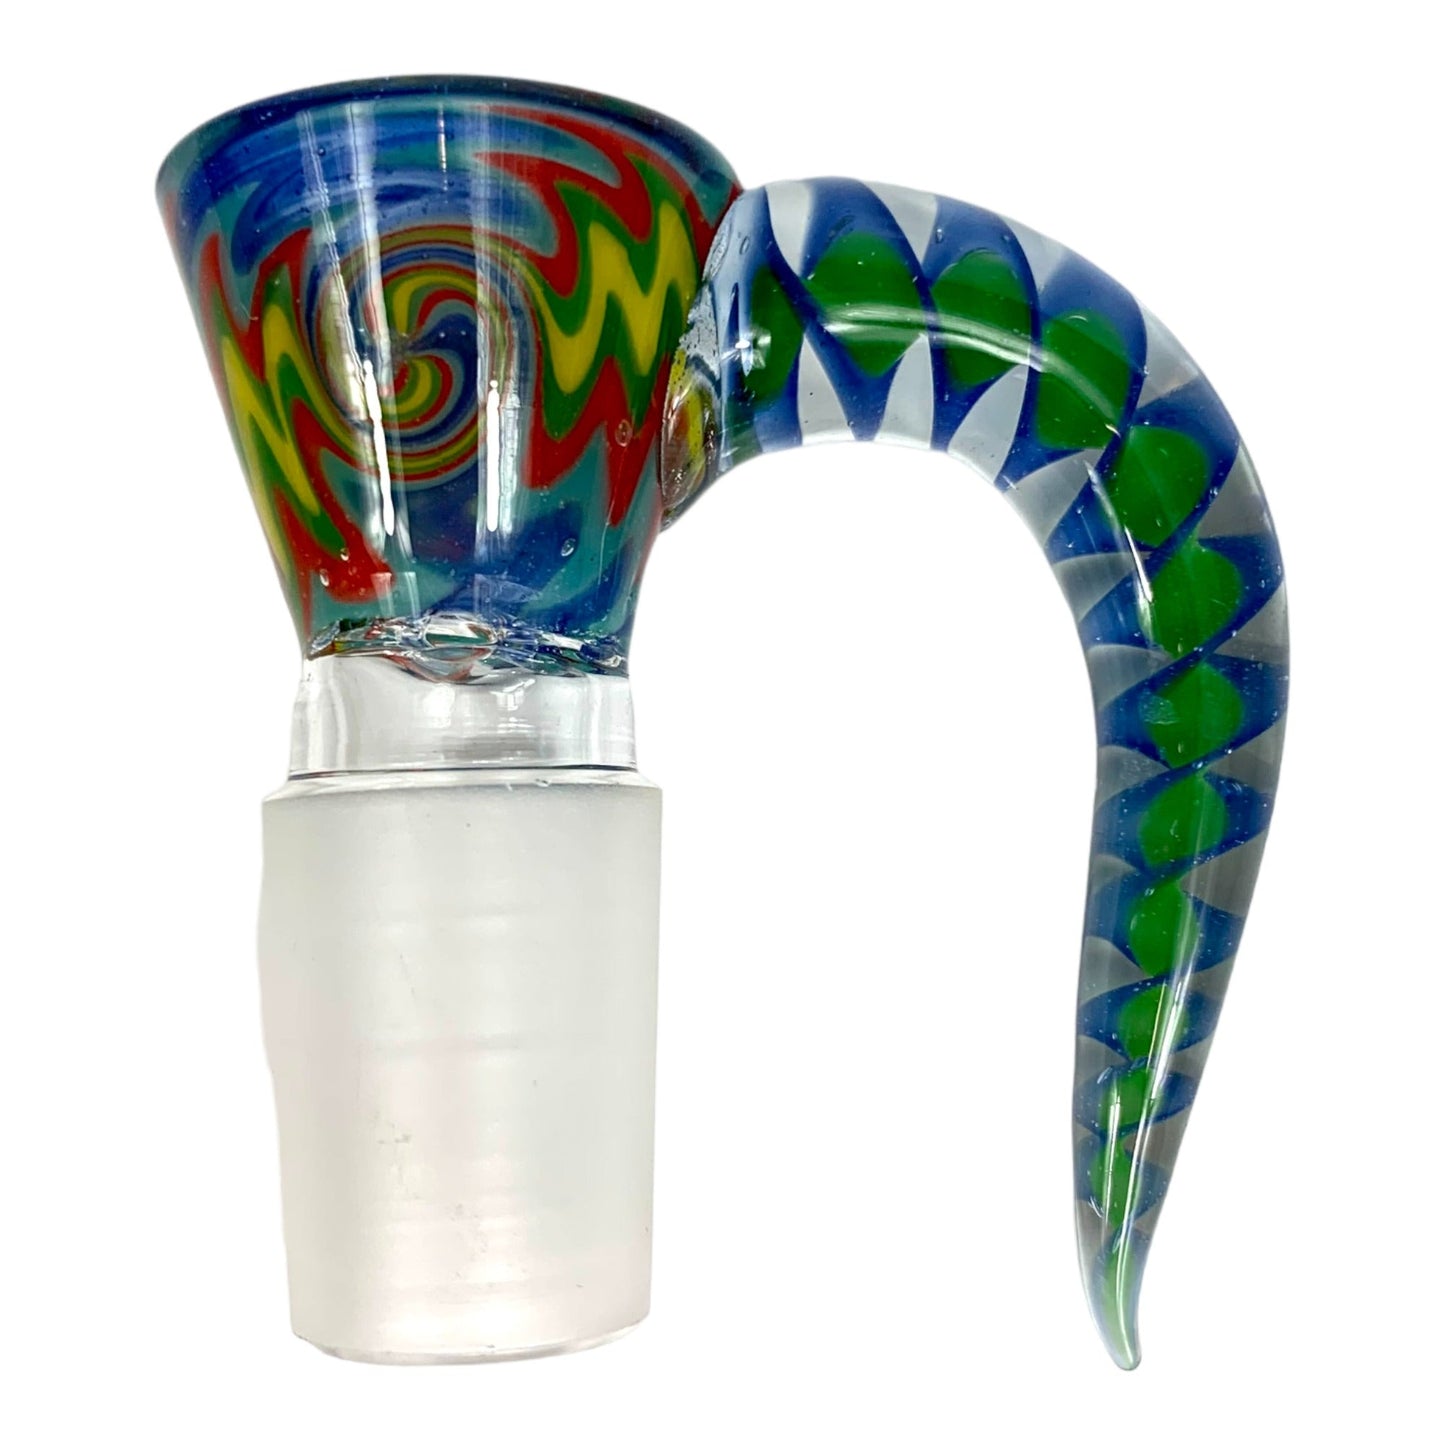 18mm Wig Wam Cone Piece - 4 Hole Glass Filter - Green and Blue - The Bong Baron